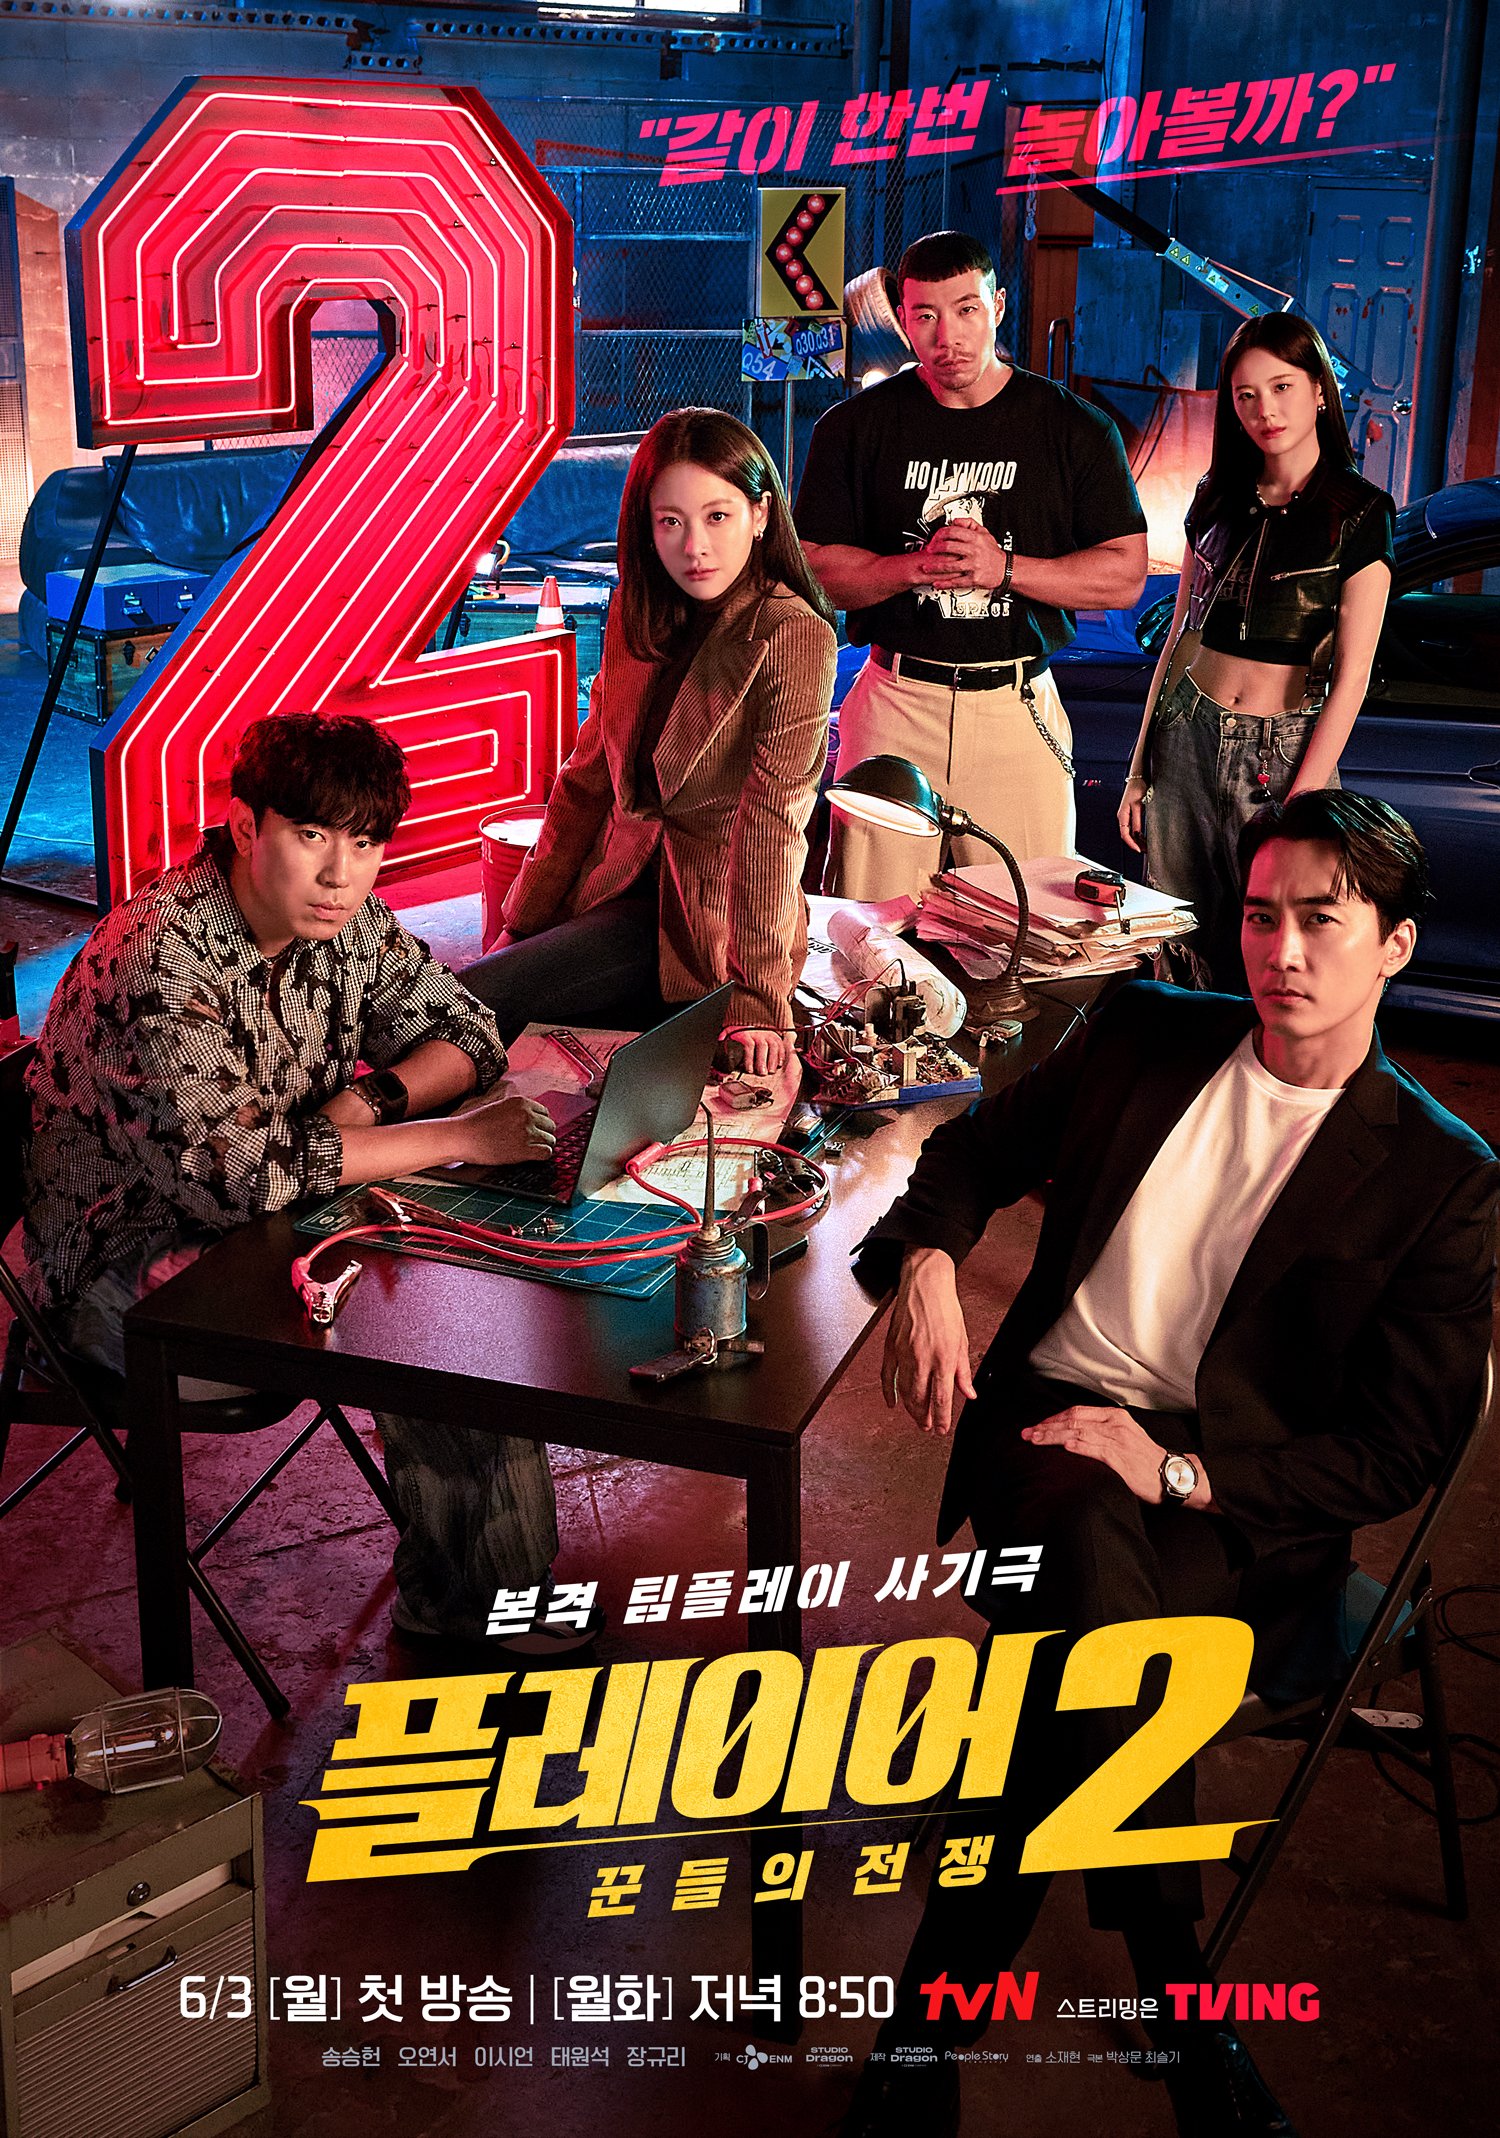 Song Seung Heon, Oh Yeon Seo, Lee Si Eon, Jang Gyuri, And Tae Won Suk Are Ready To Outsmart The Corrupt In 